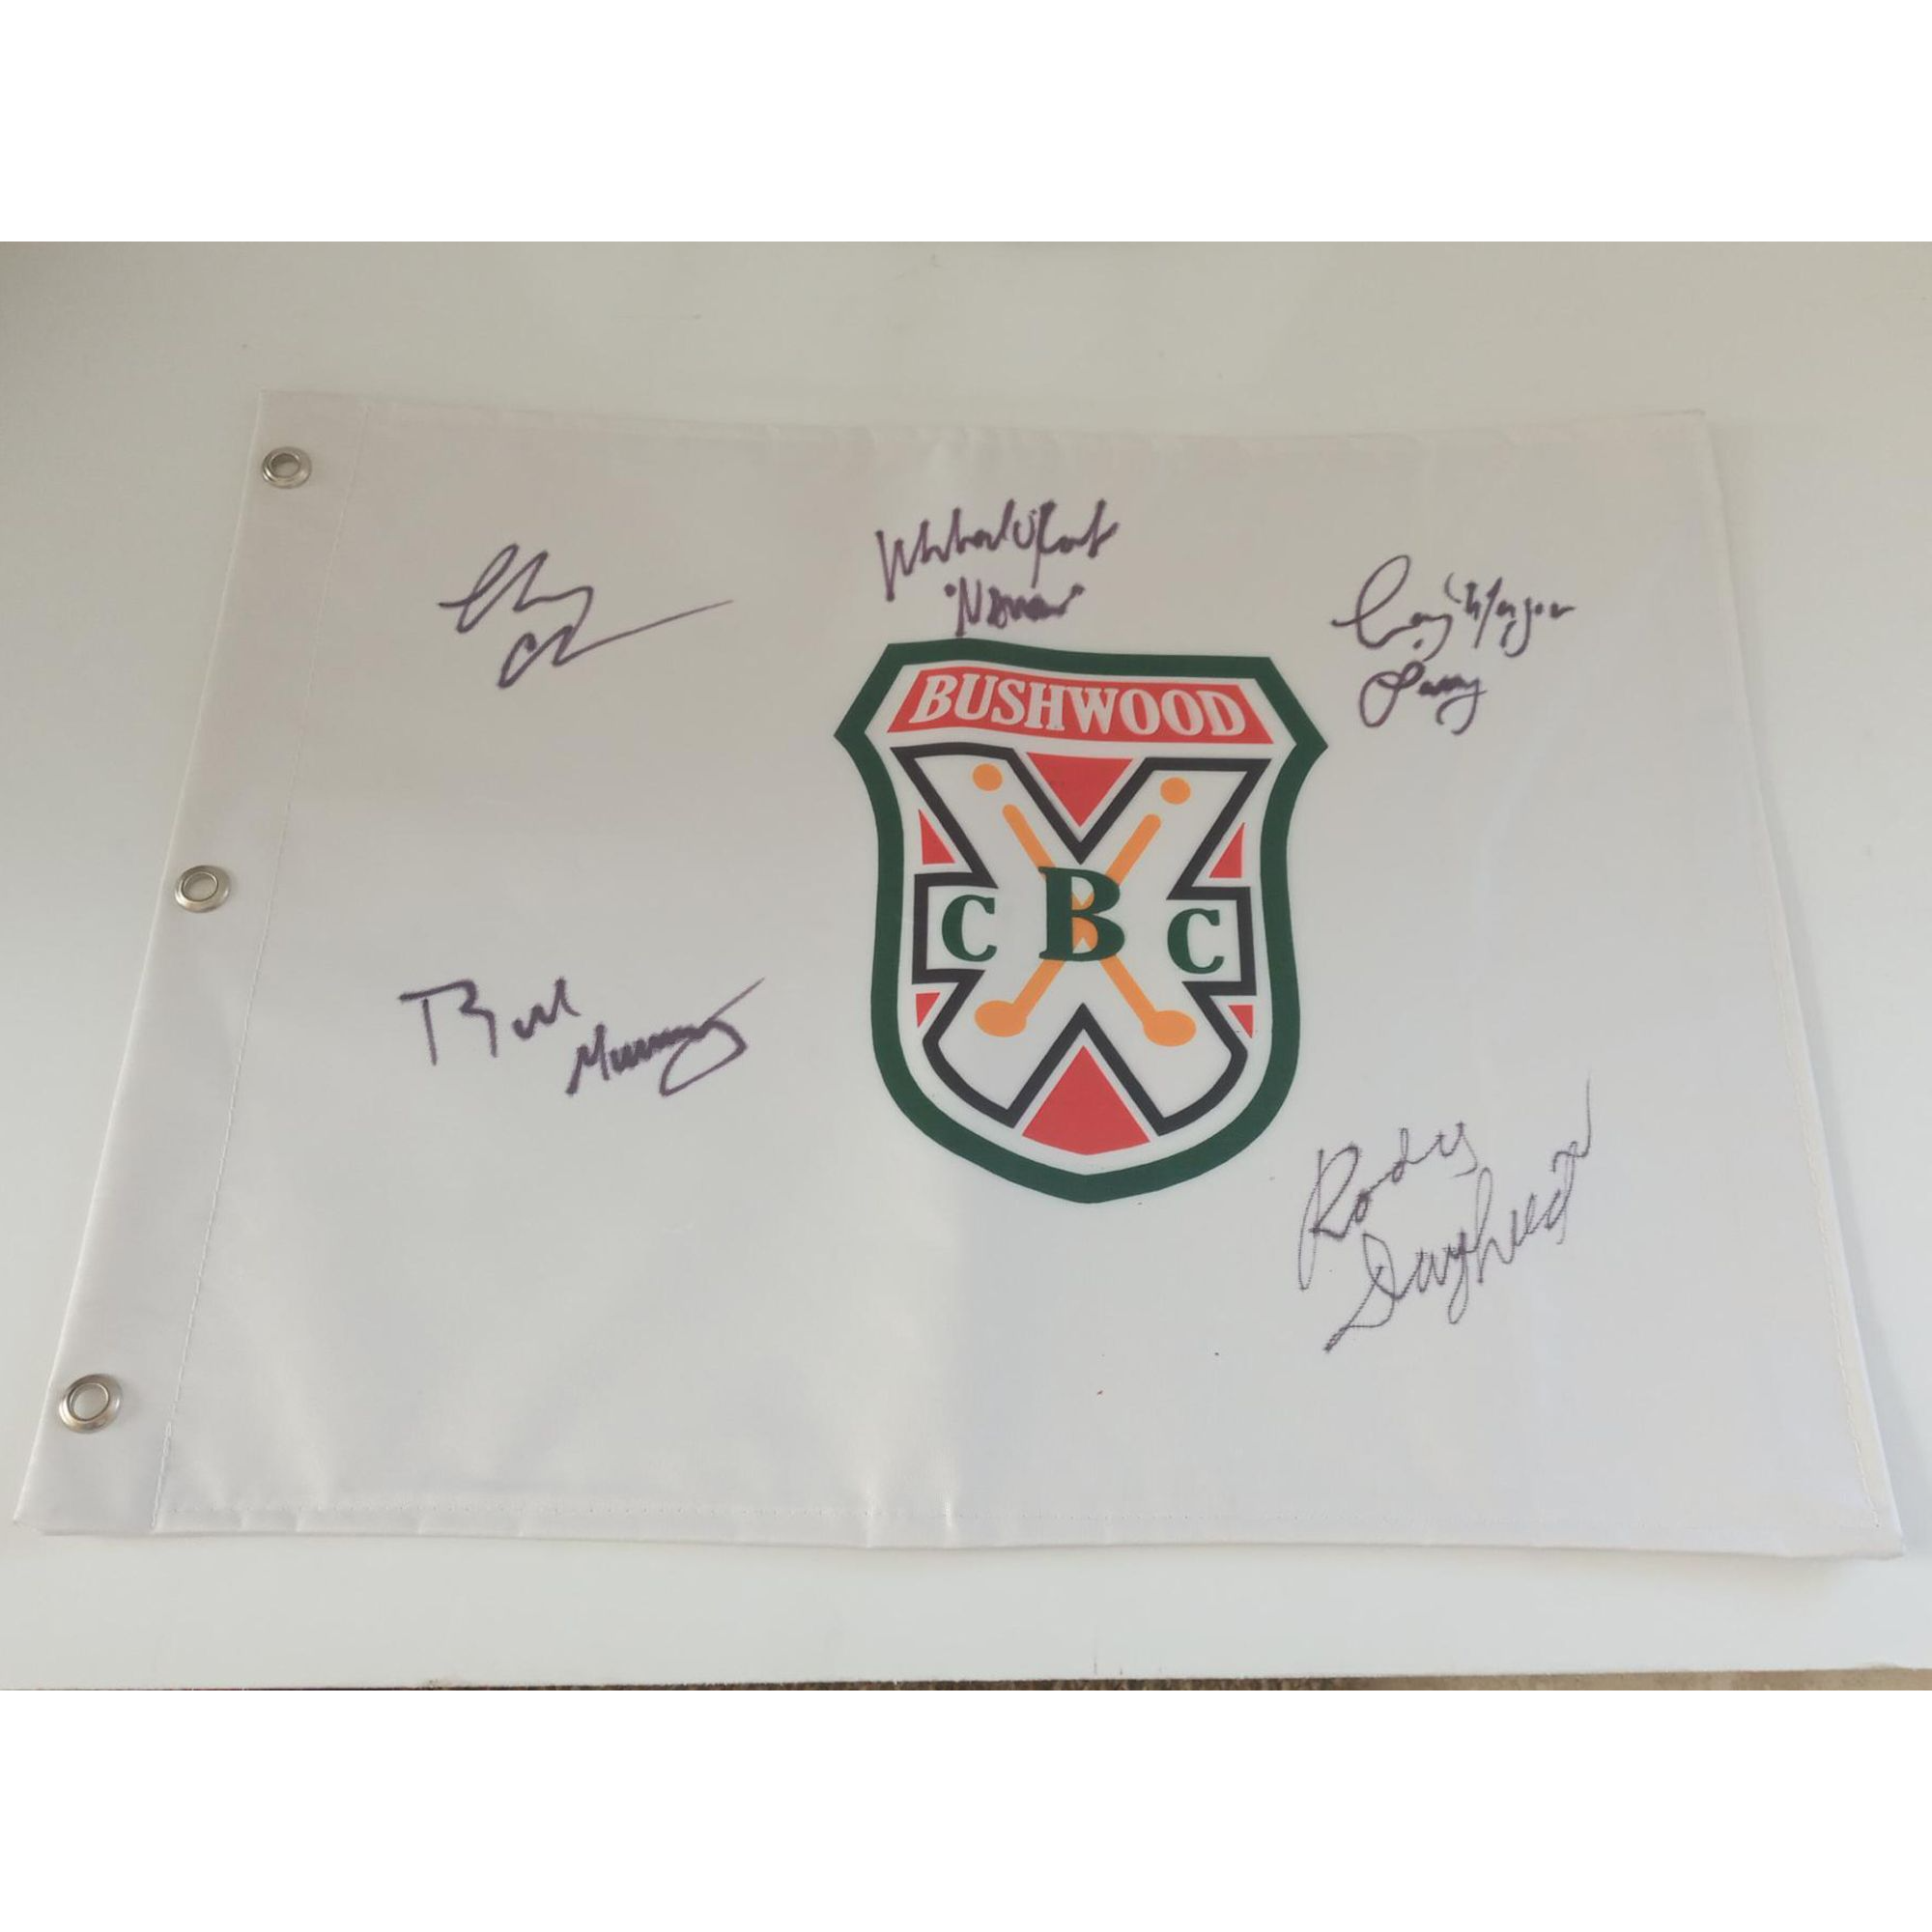 Caddyshack Bushwood golf flag Chevy Chase, Rodney Dangerfield, Bill Murray, Cindy Long, Michael O'Rourke, signed with proof